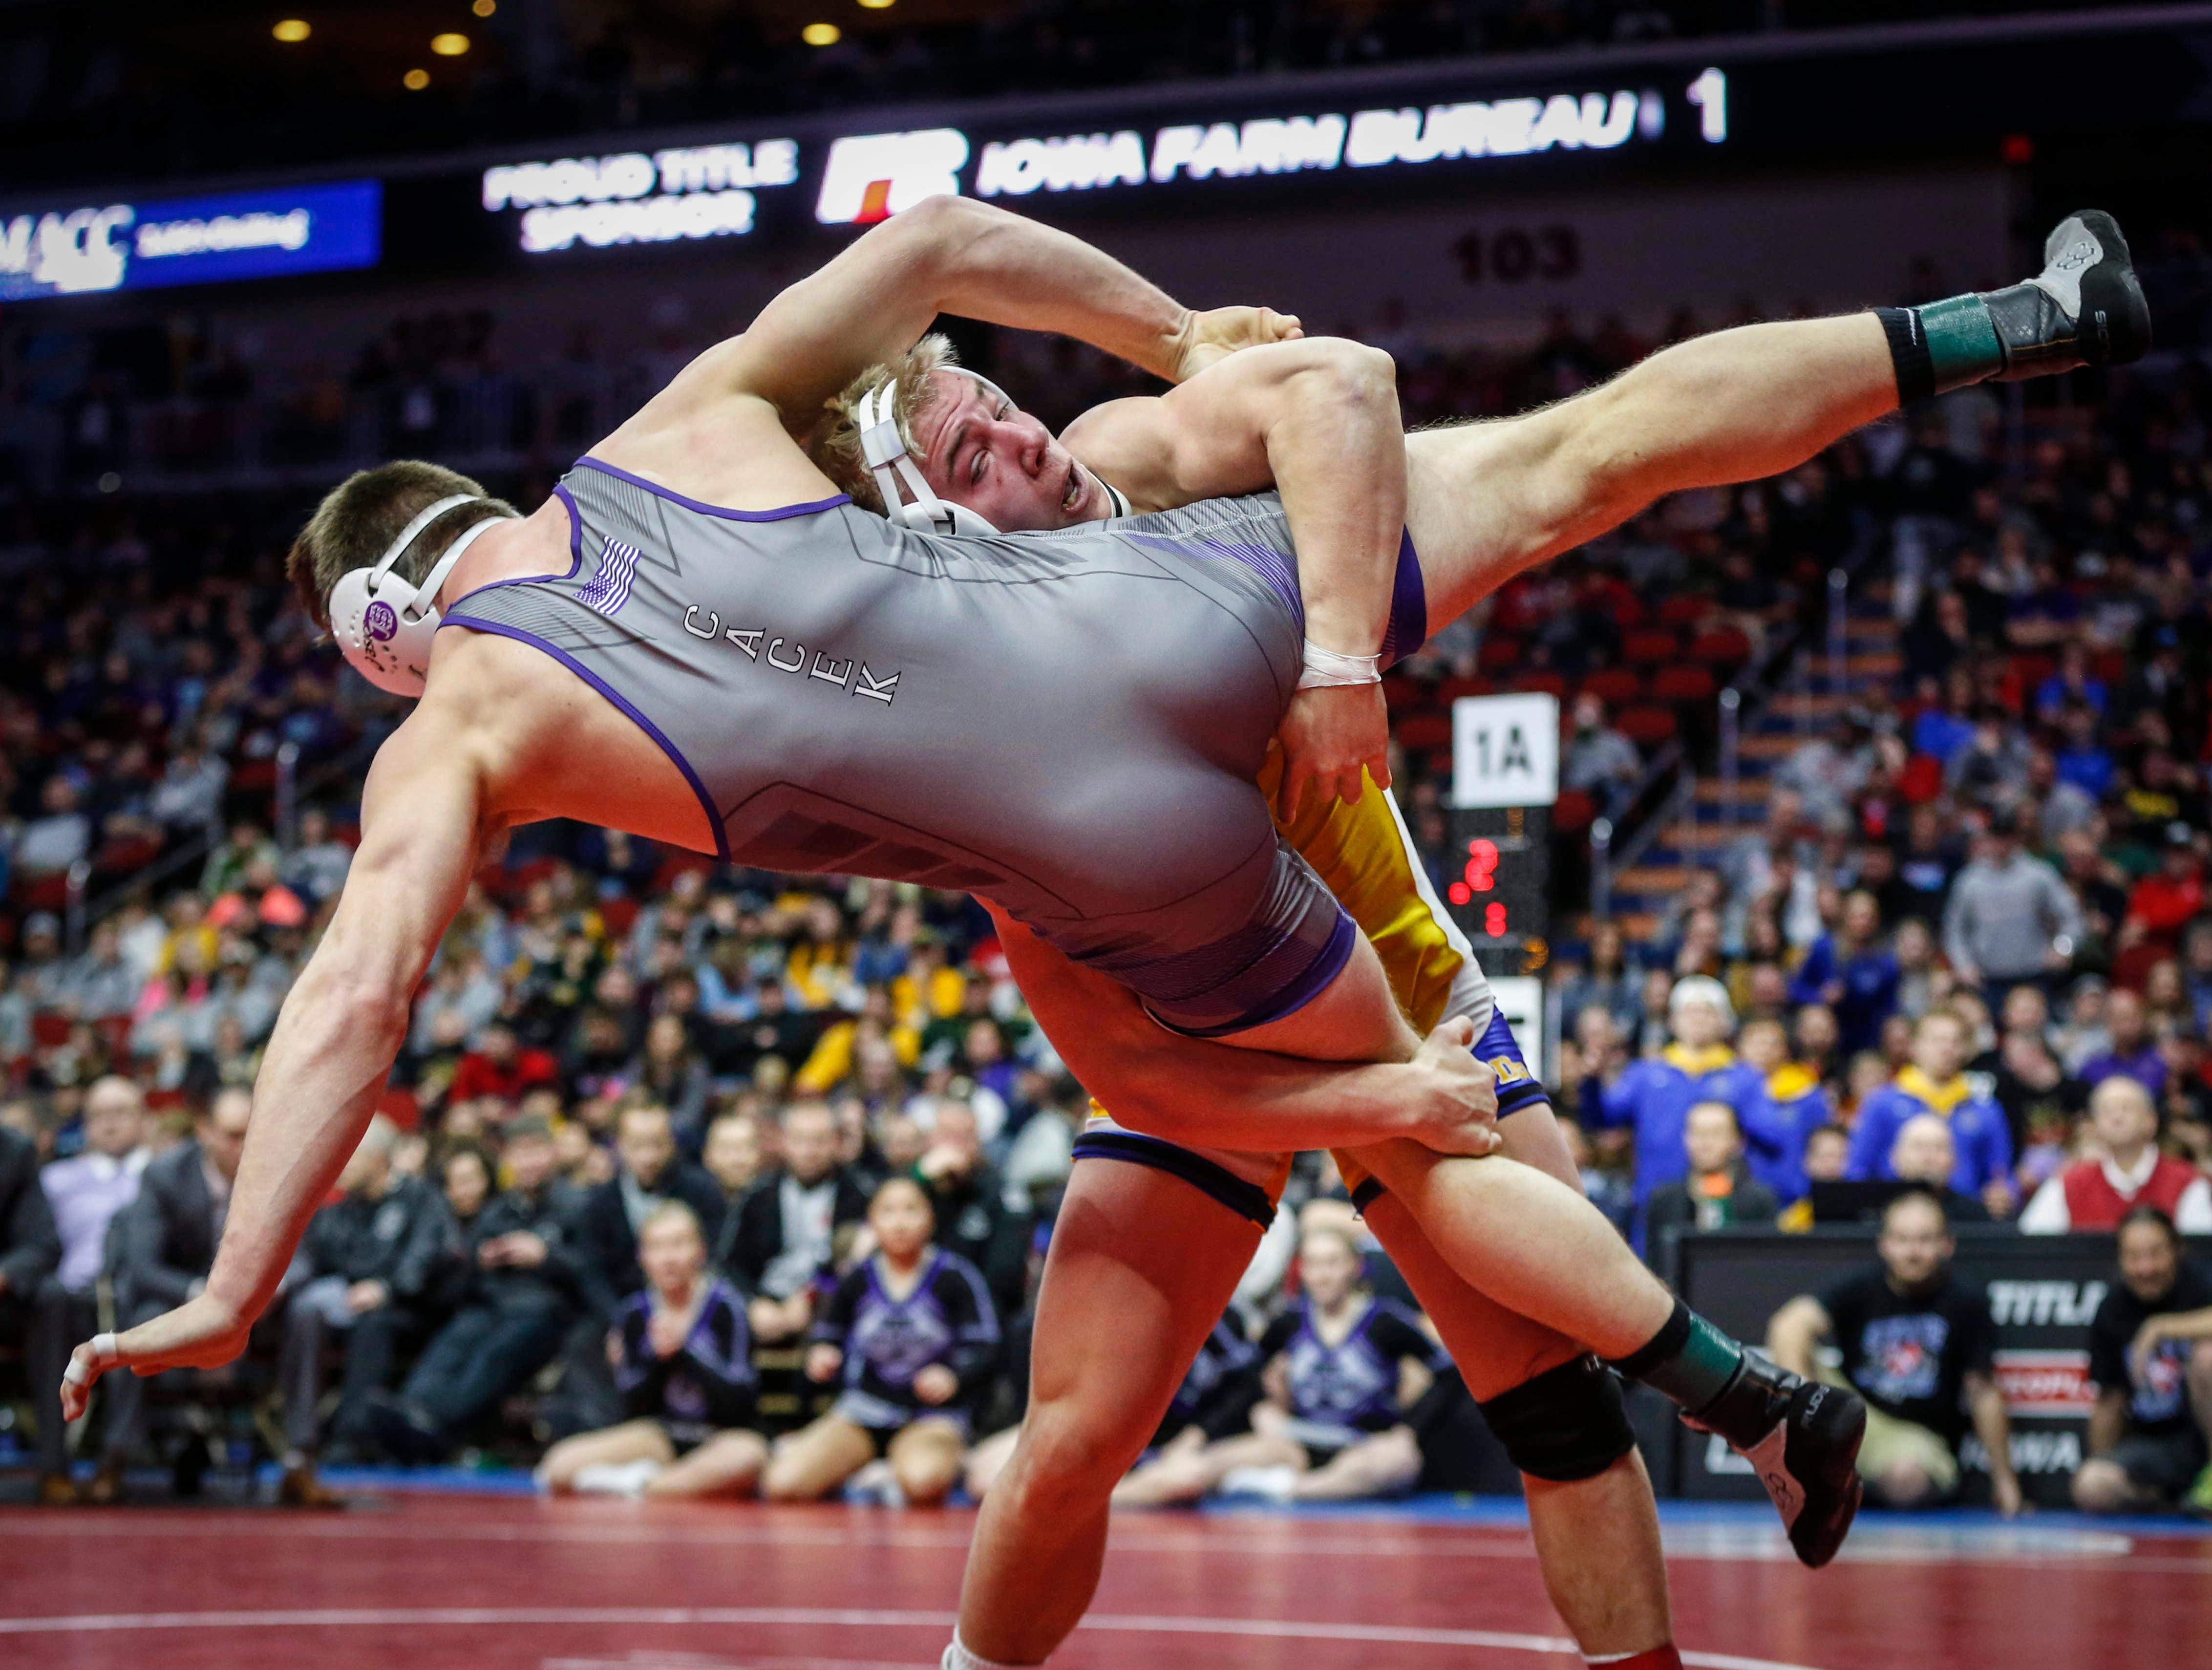 Photos Iowa state high school wrestling Class 1A championship matches